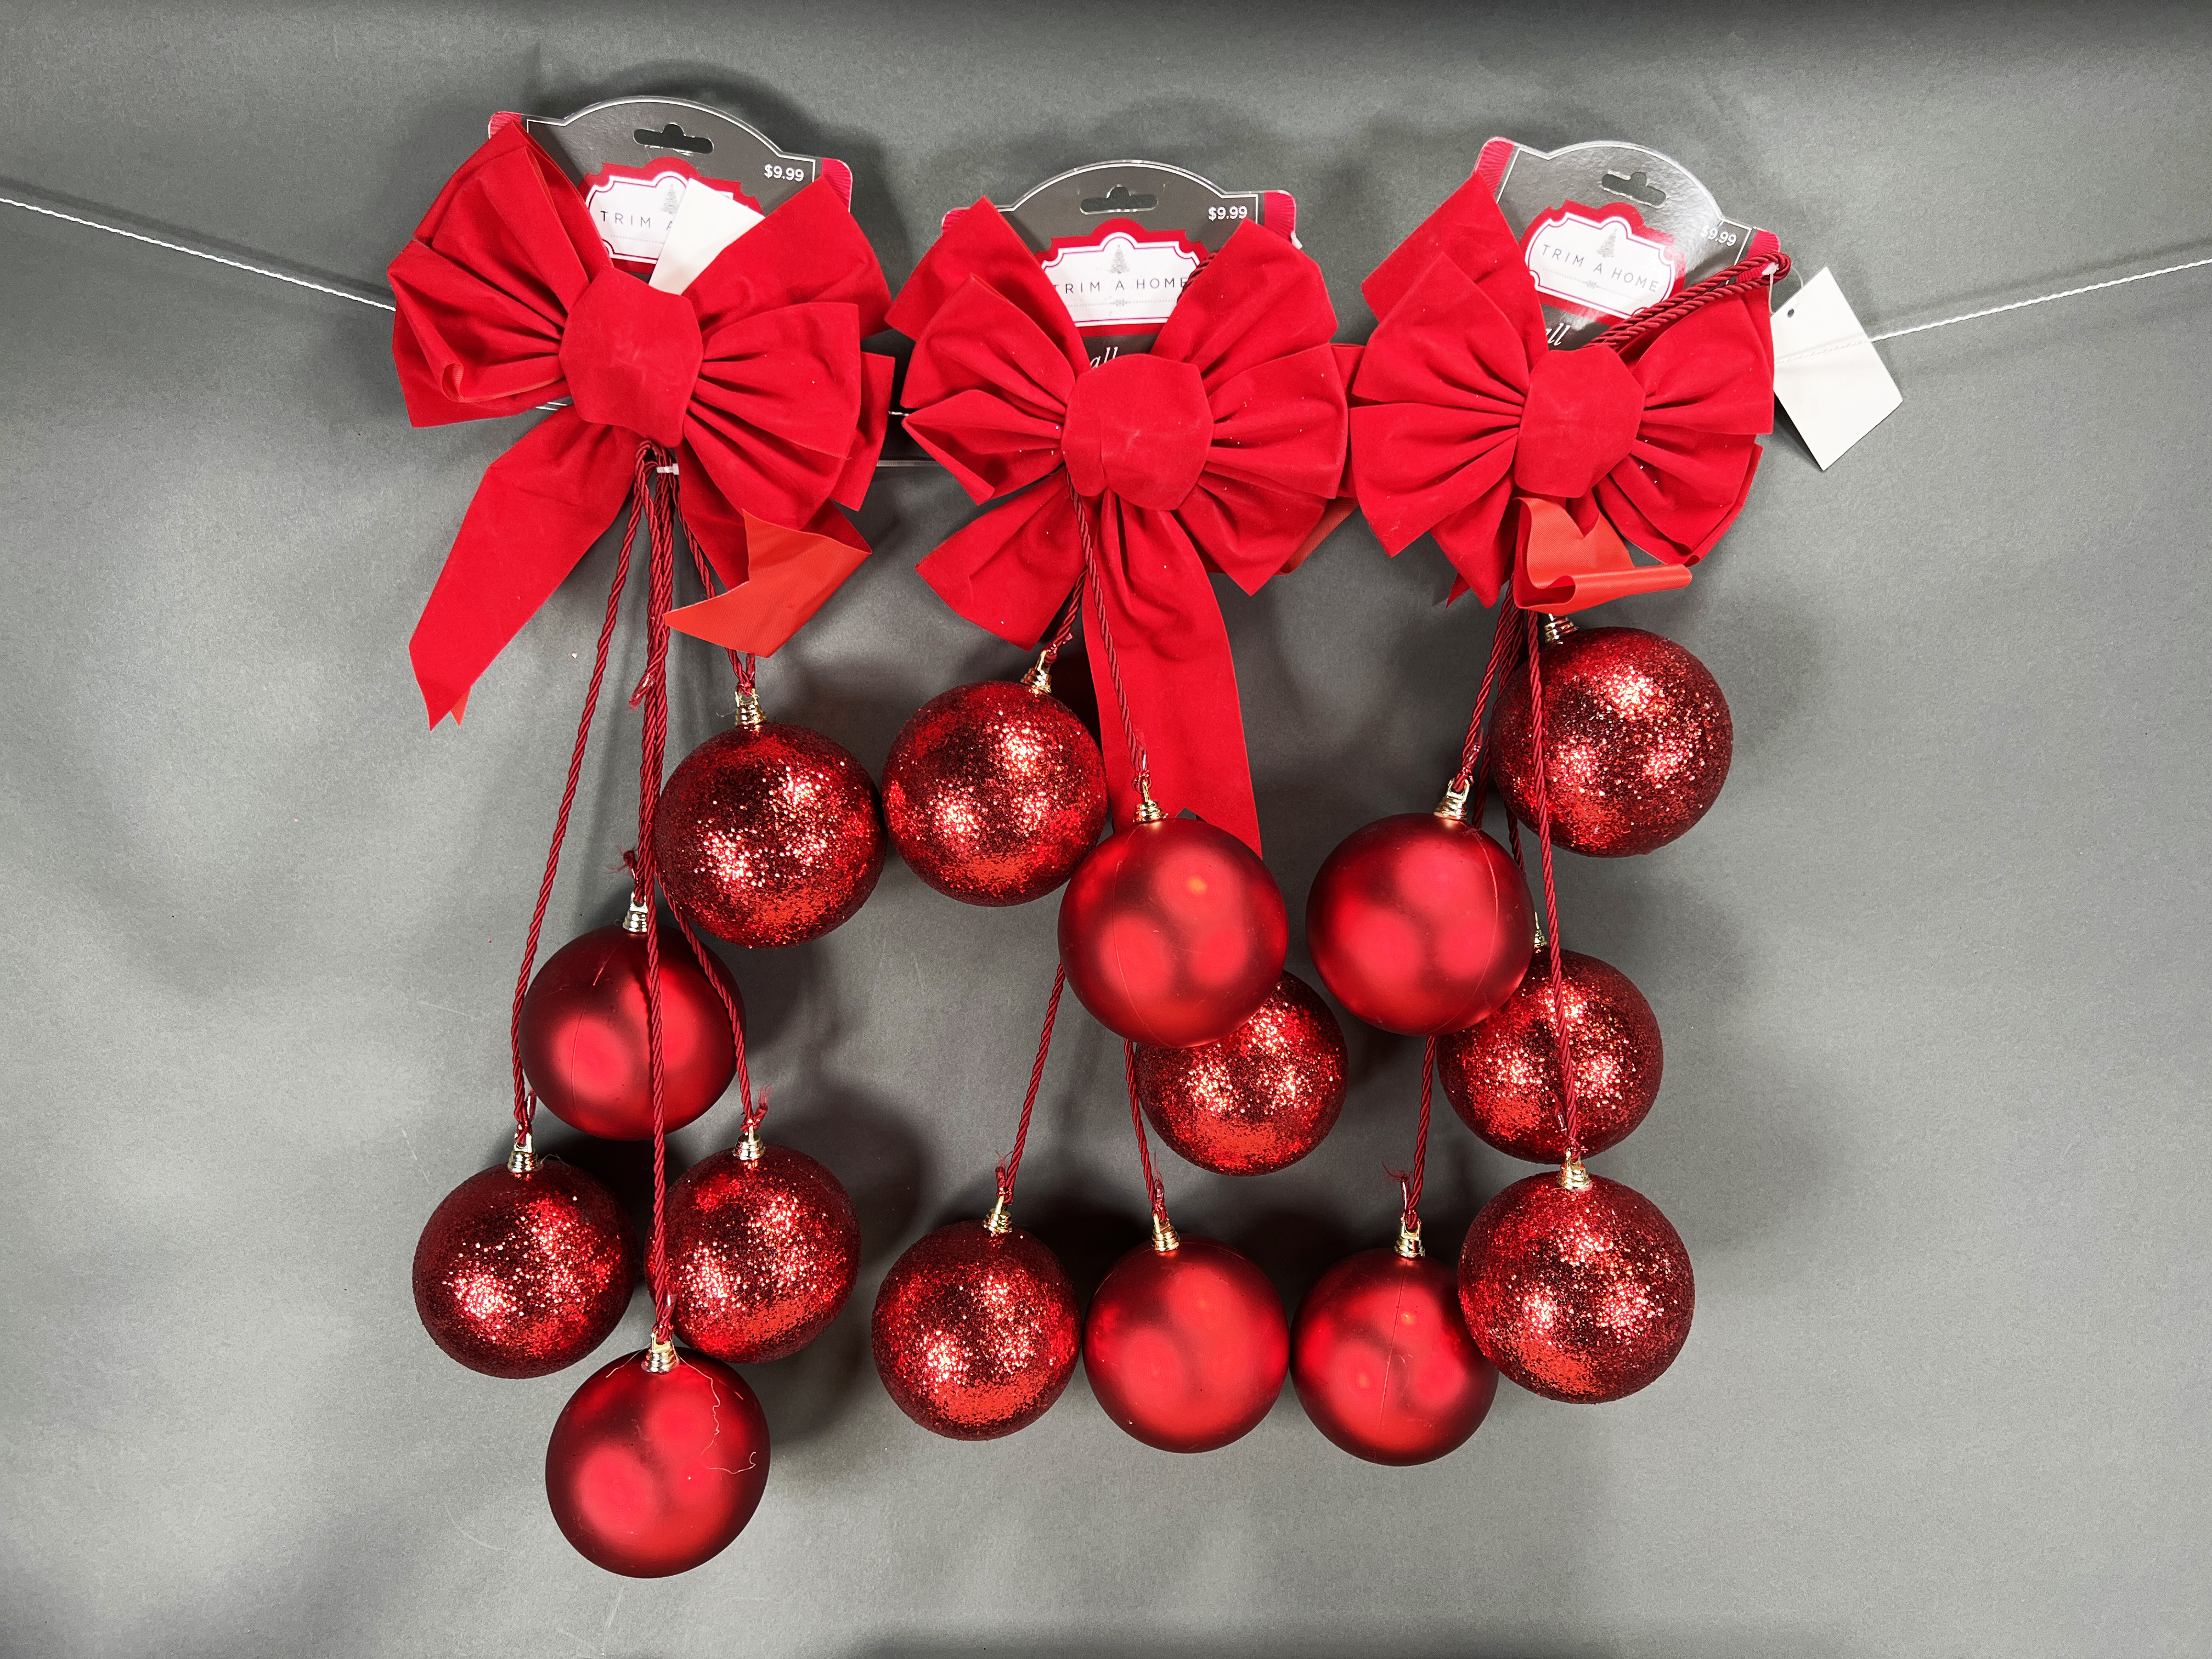 Red Christmas Ornaments And Wooden Sled image 3